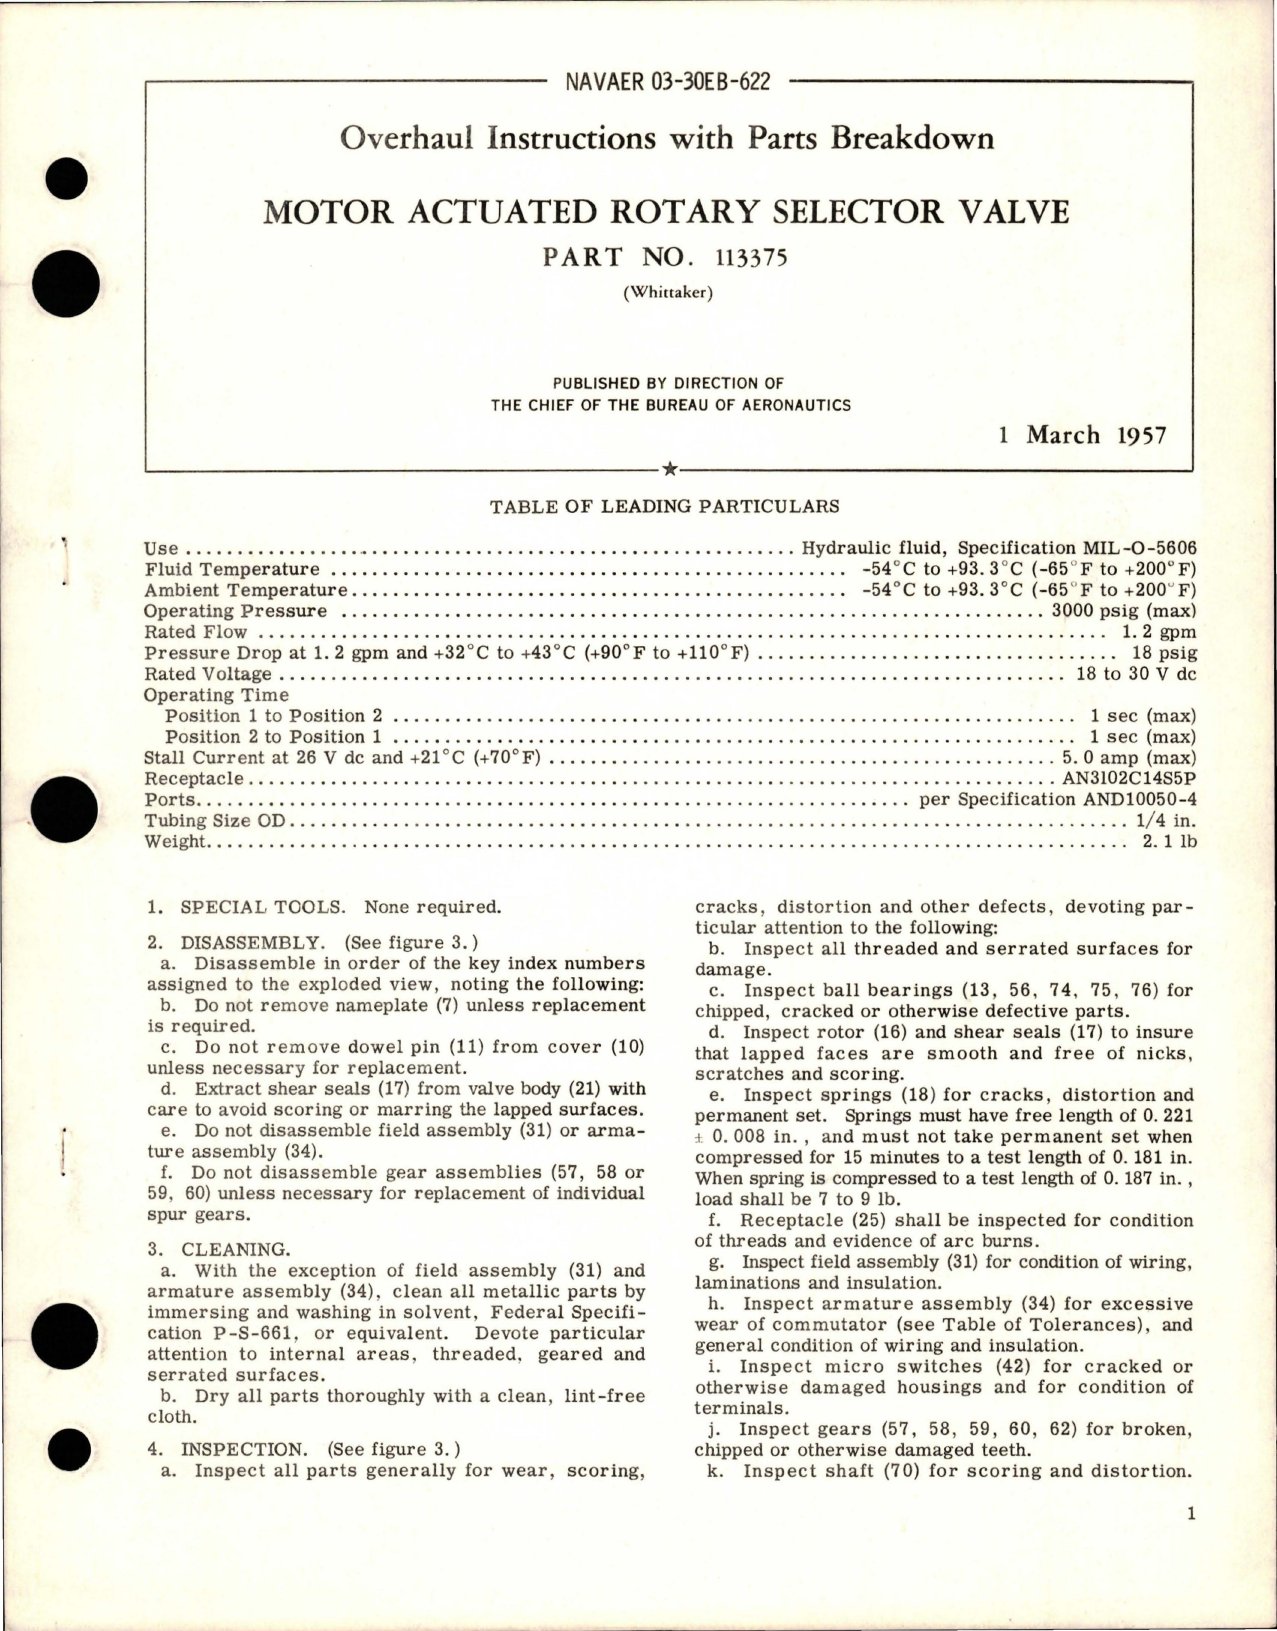 Sample page 1 from AirCorps Library document: Overhaul Instructions with Parts for Motor Actuated Rotary Selector Valve - Part 113375